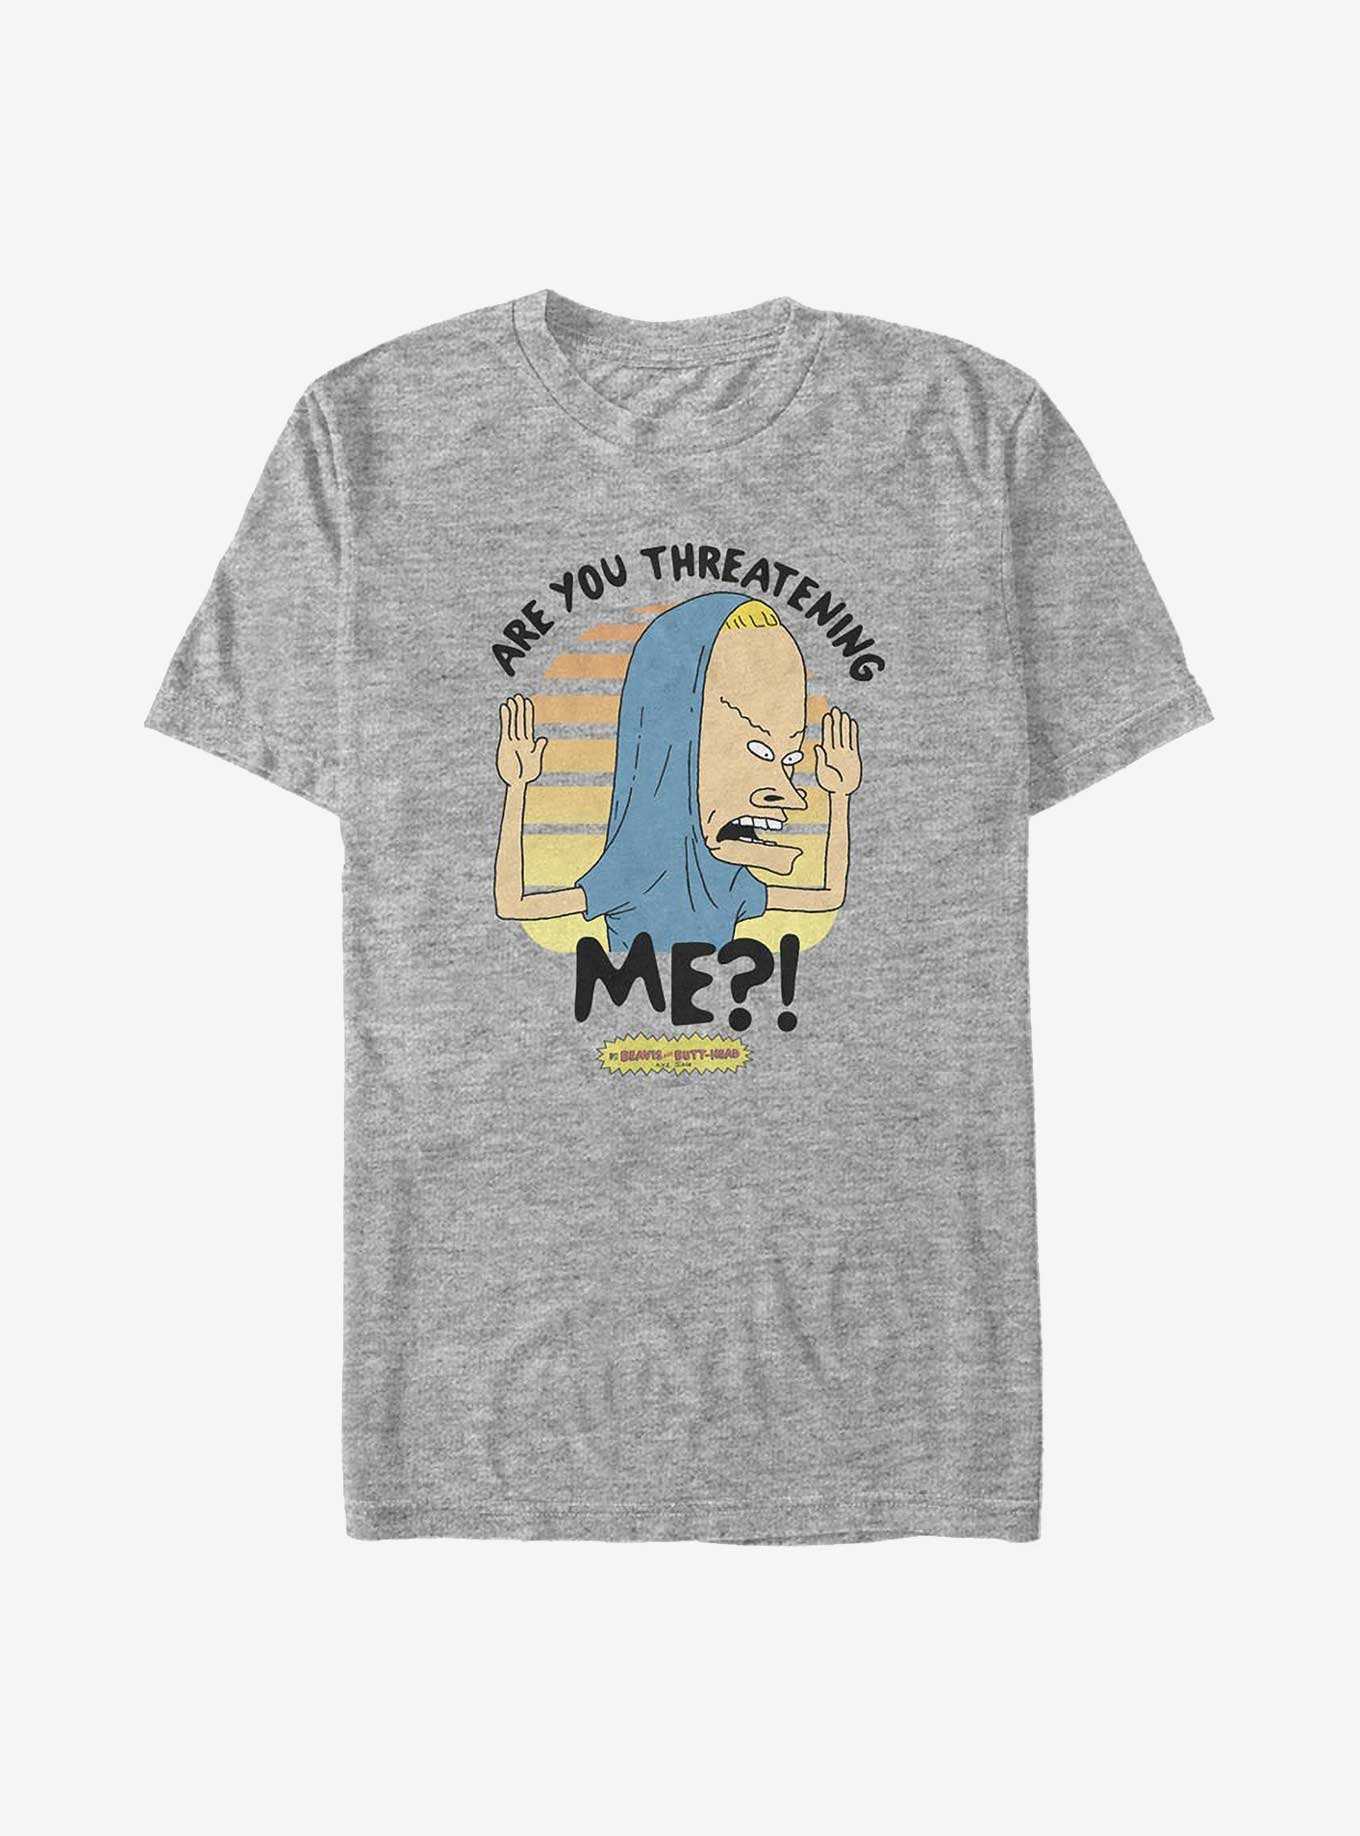 Beavis and Butt-Head Are You Threatening Me? Big & Tall T-Shirt, , hi-res